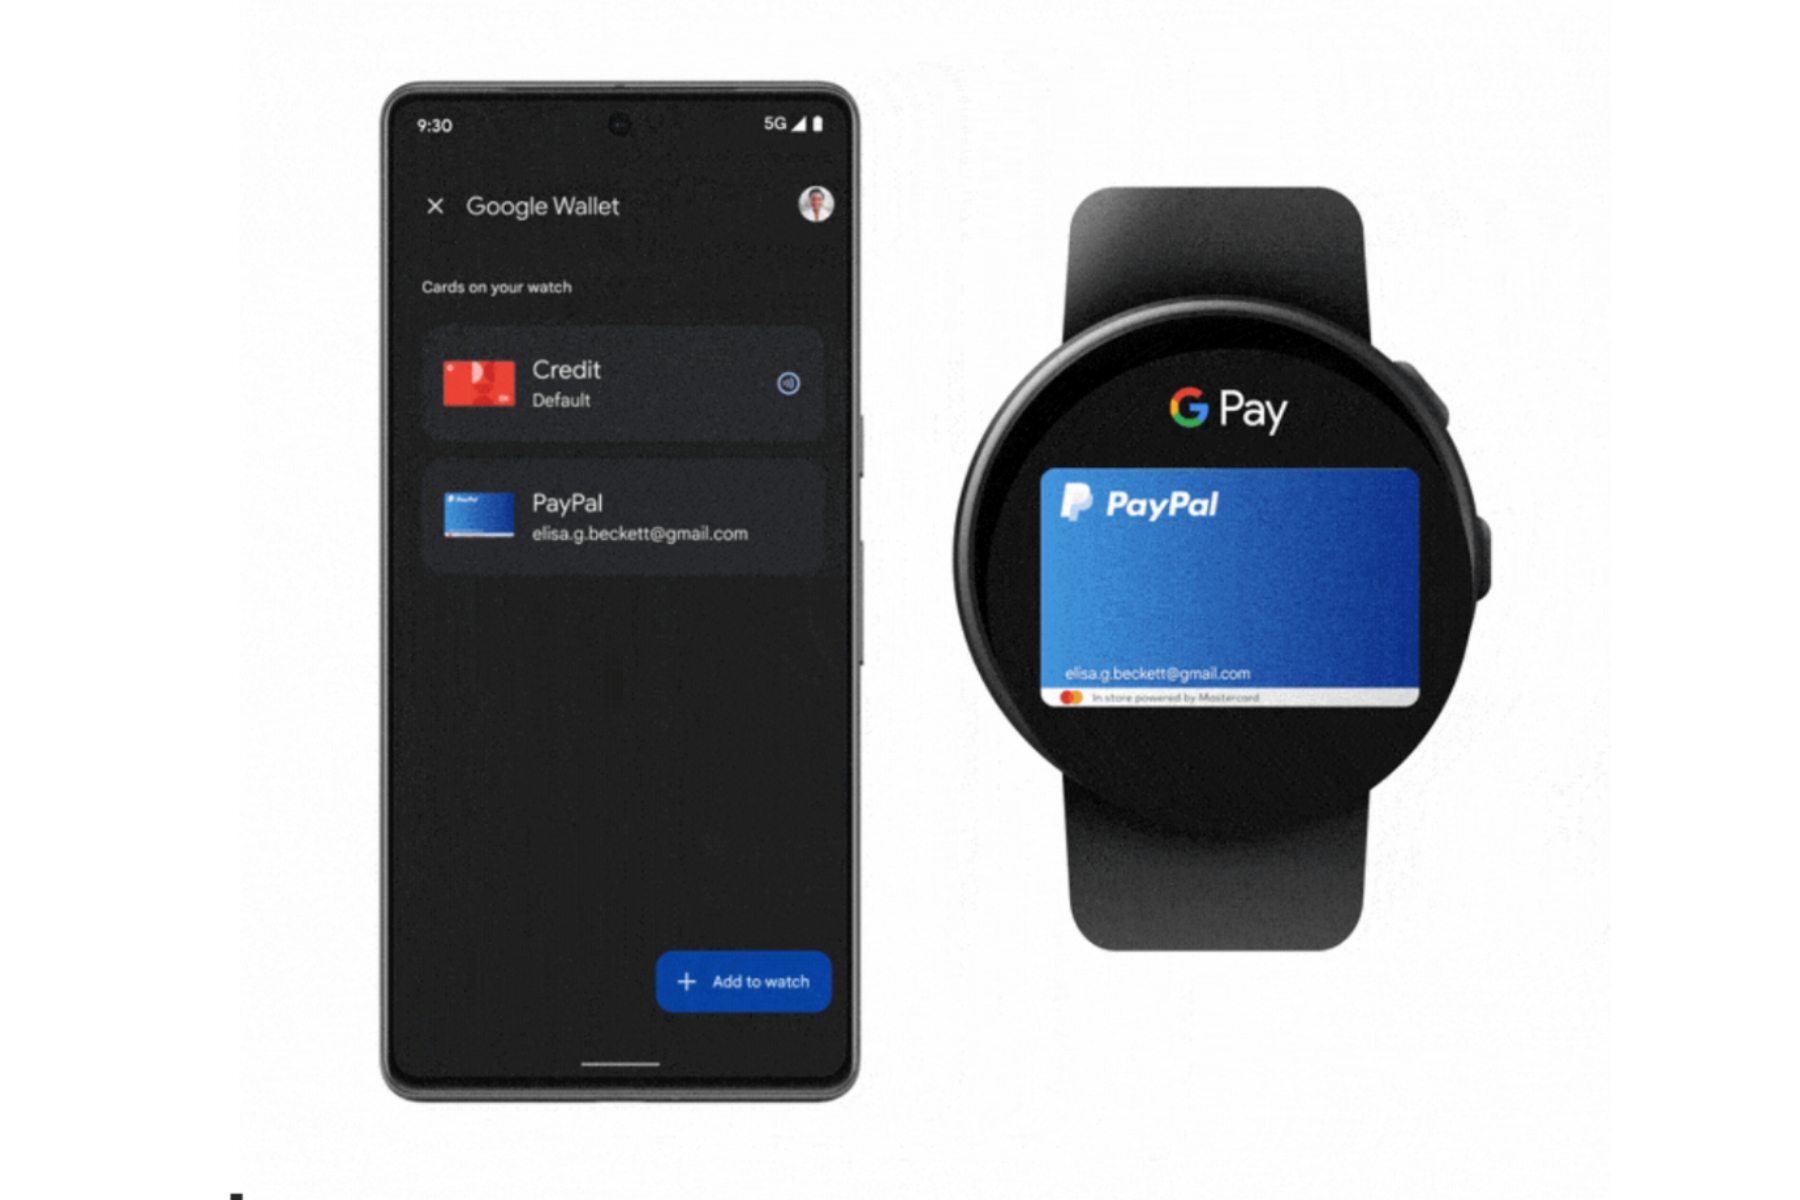 PayPal support in Google Wallet for Wear OS.